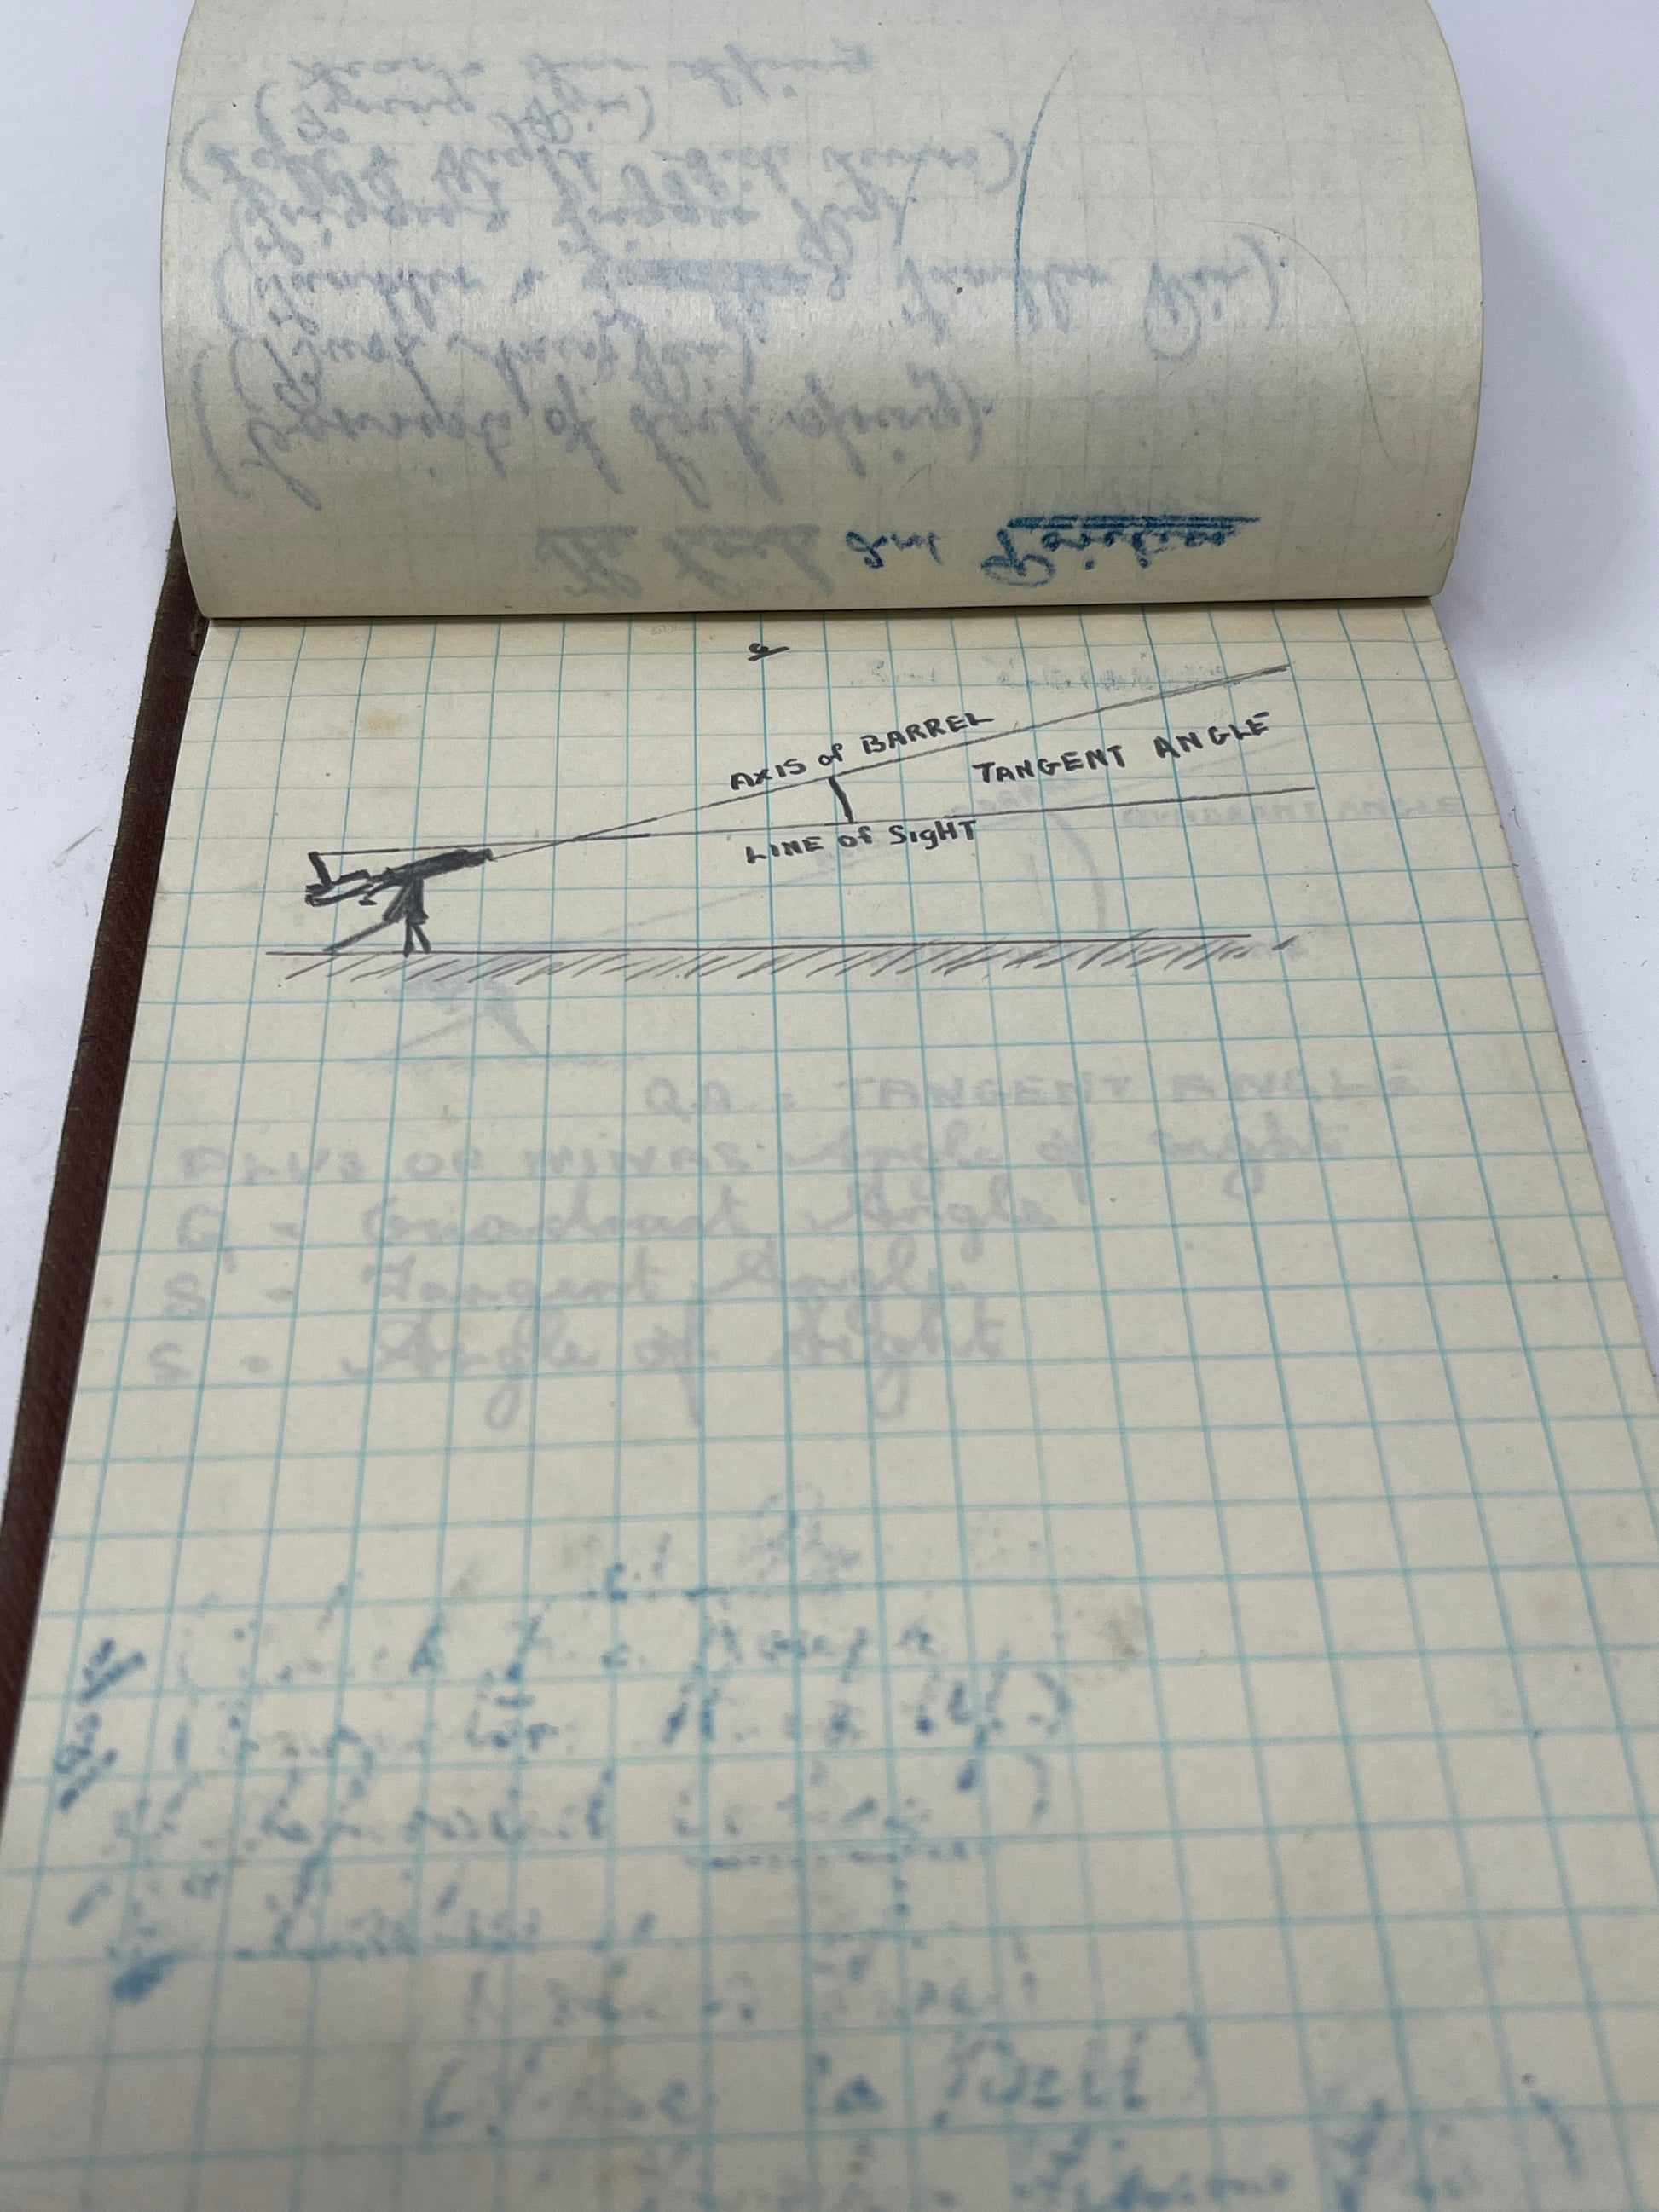 The book contains handwritten notes relating to the Vickers Machine Gun  Army Book 153 is the Army issue notebook that was issued to Officers and NCOs to keep in their pockets when on active service.  The notebook contains a hardback cover with a brown waterproof fabric  Elastic strap to keep the book closed   removable paper notepad